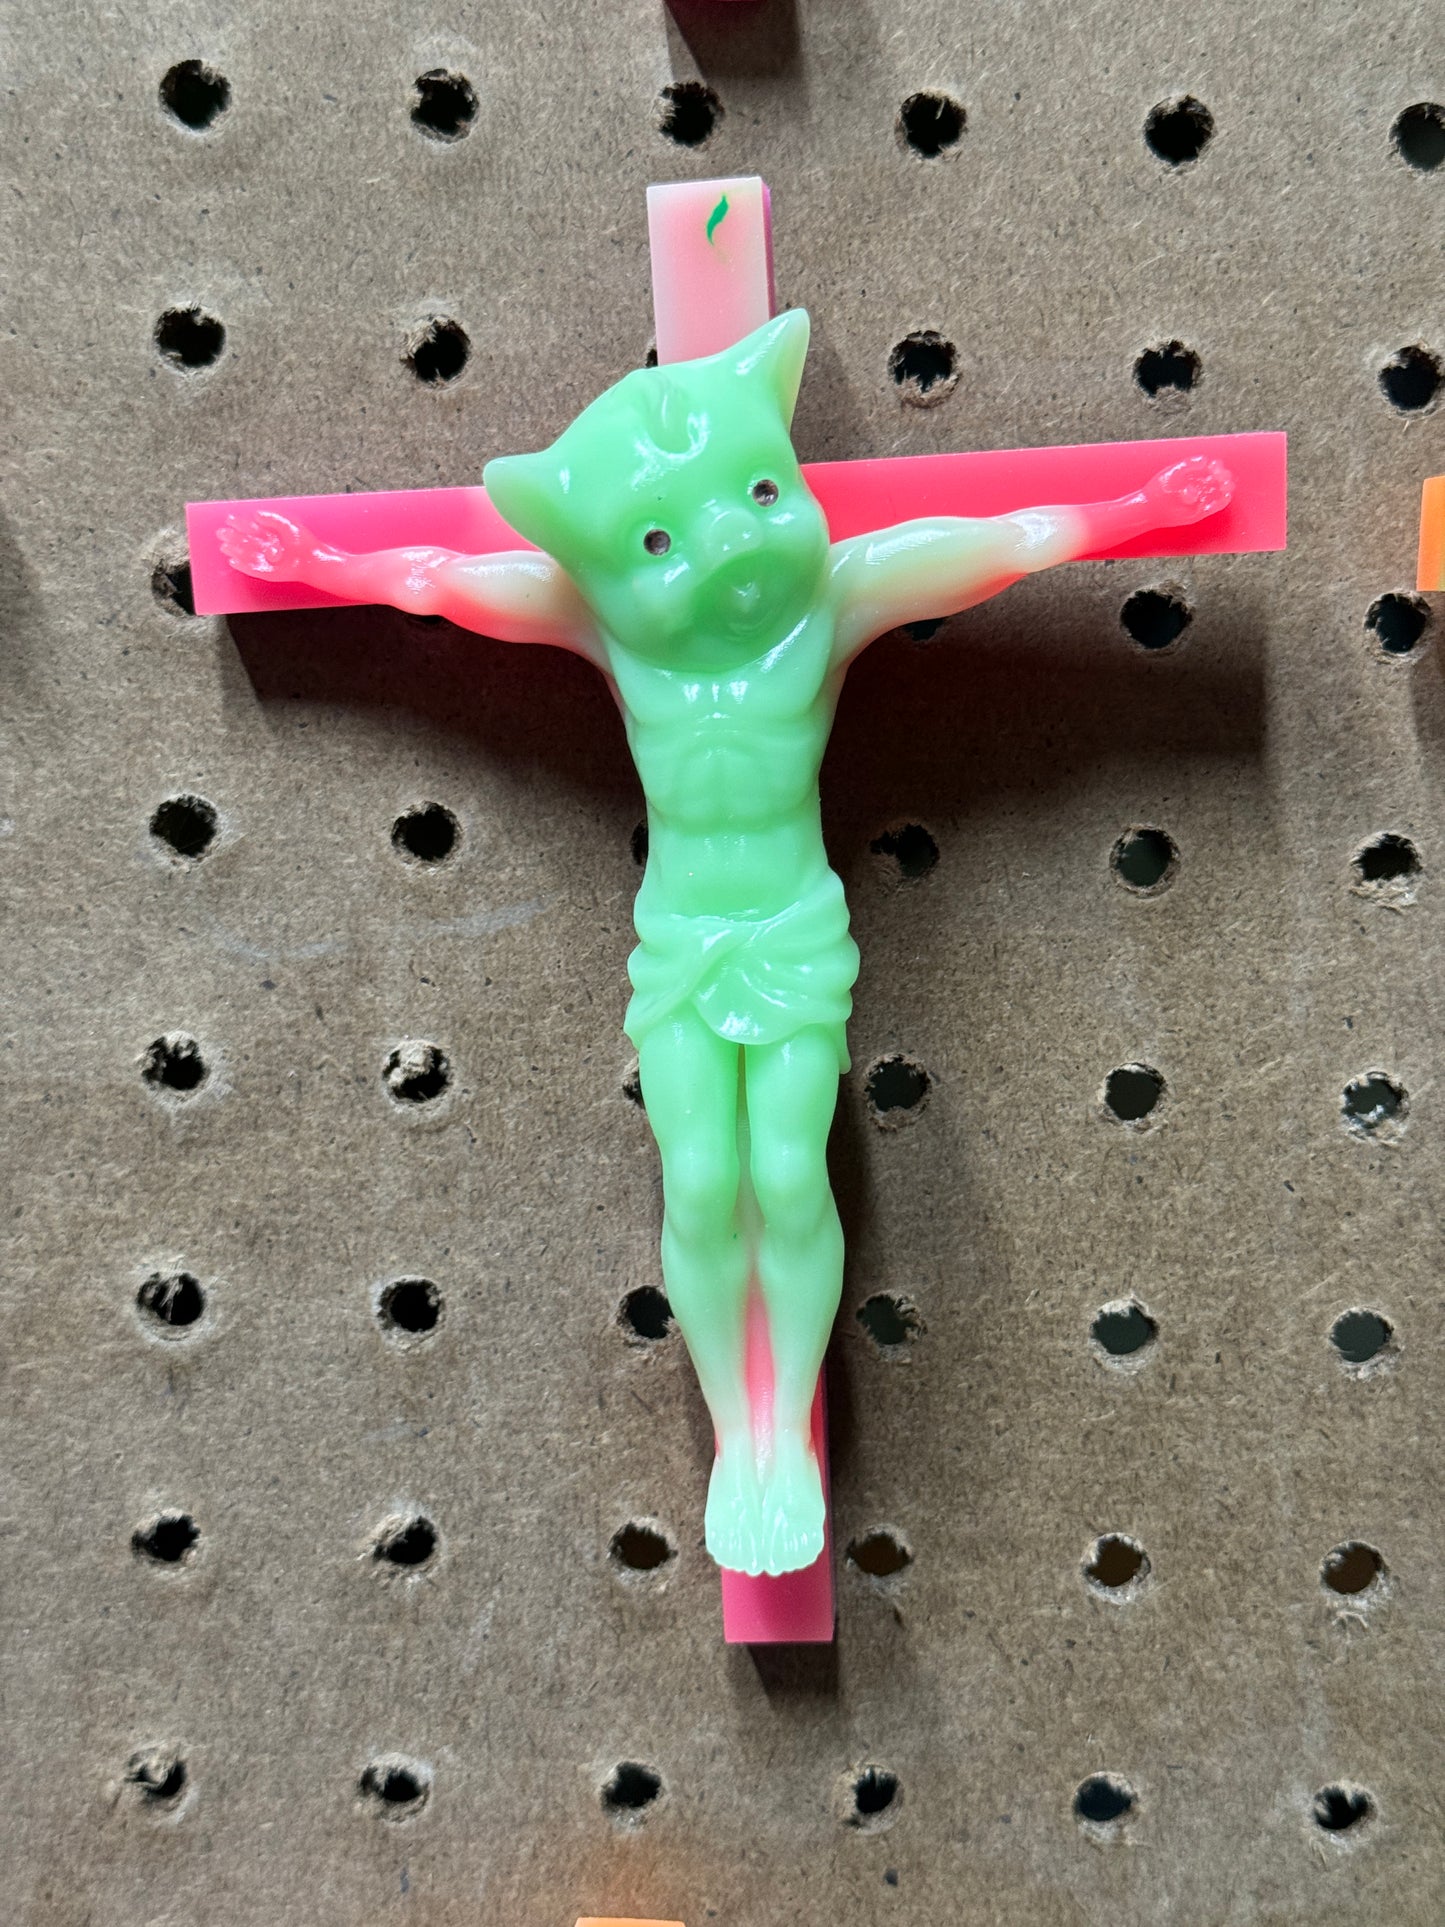 Christ on the Cross but he is Piggy Jesus: Choice